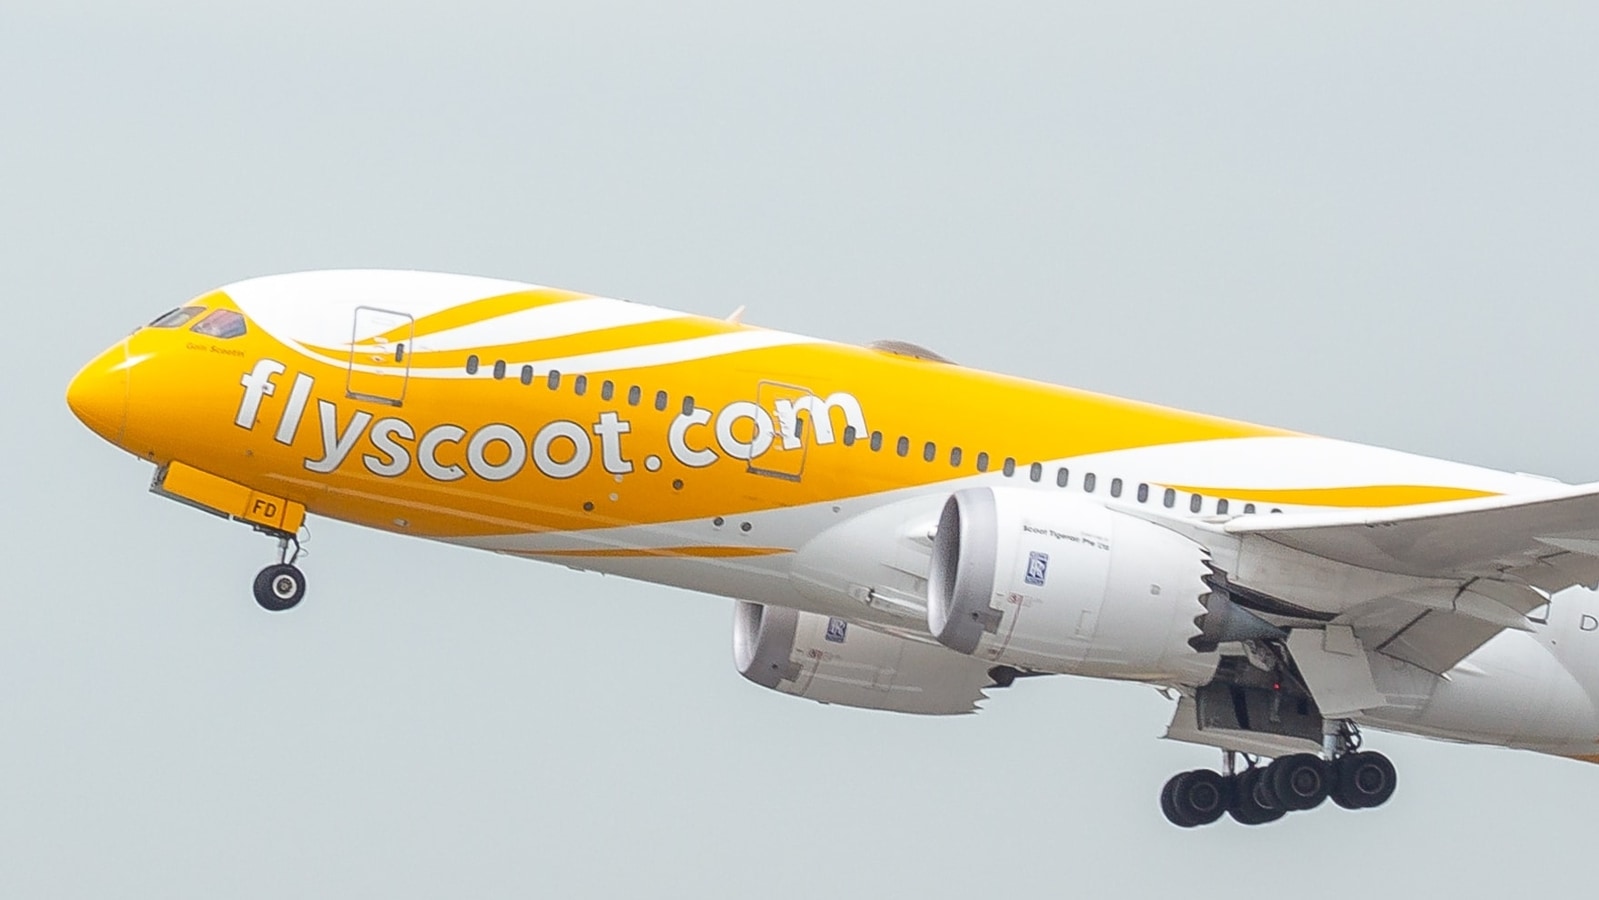 Scoot flight, which left behind flyers at replies after DGCA | Latest India - Hindustan Times